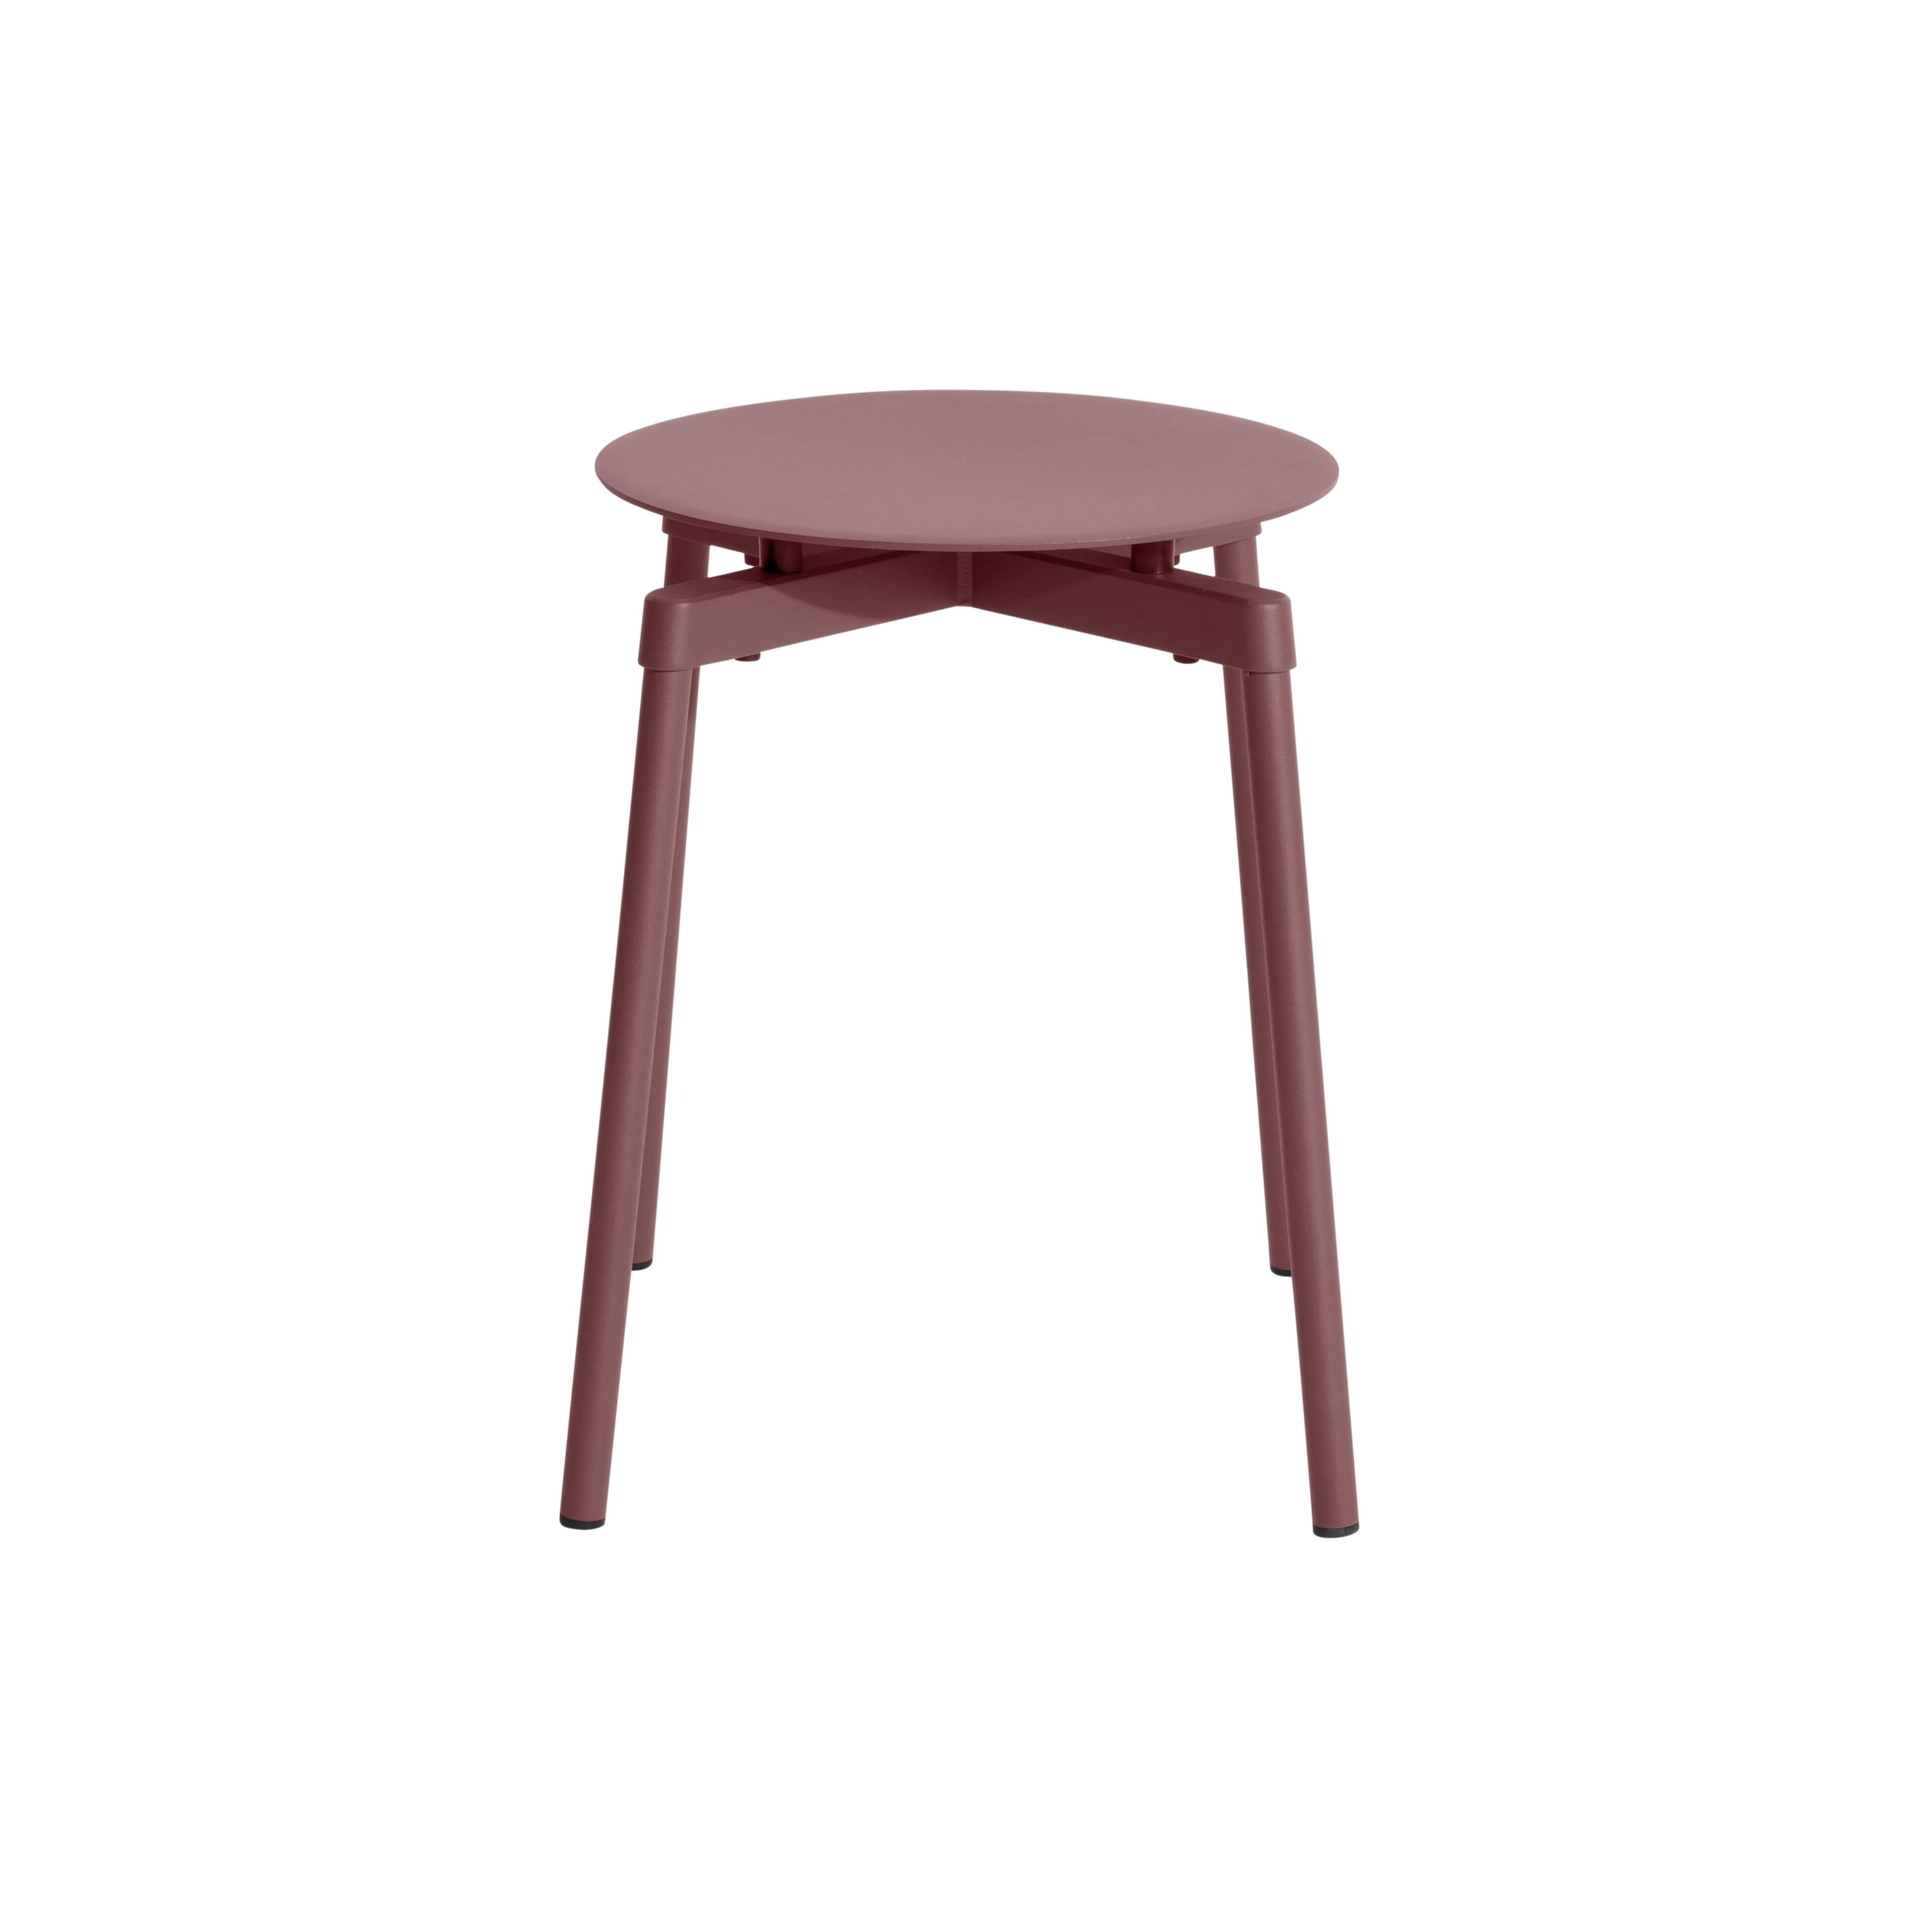 Petite Friture Fromme Stool in Brown-red Aluminium by Tom Chung, 2020

The Fromme collection stands out by its pure line and compact design. Absorbers placed under the seating gives a soft and very comfortable flexibility to seats. Made from